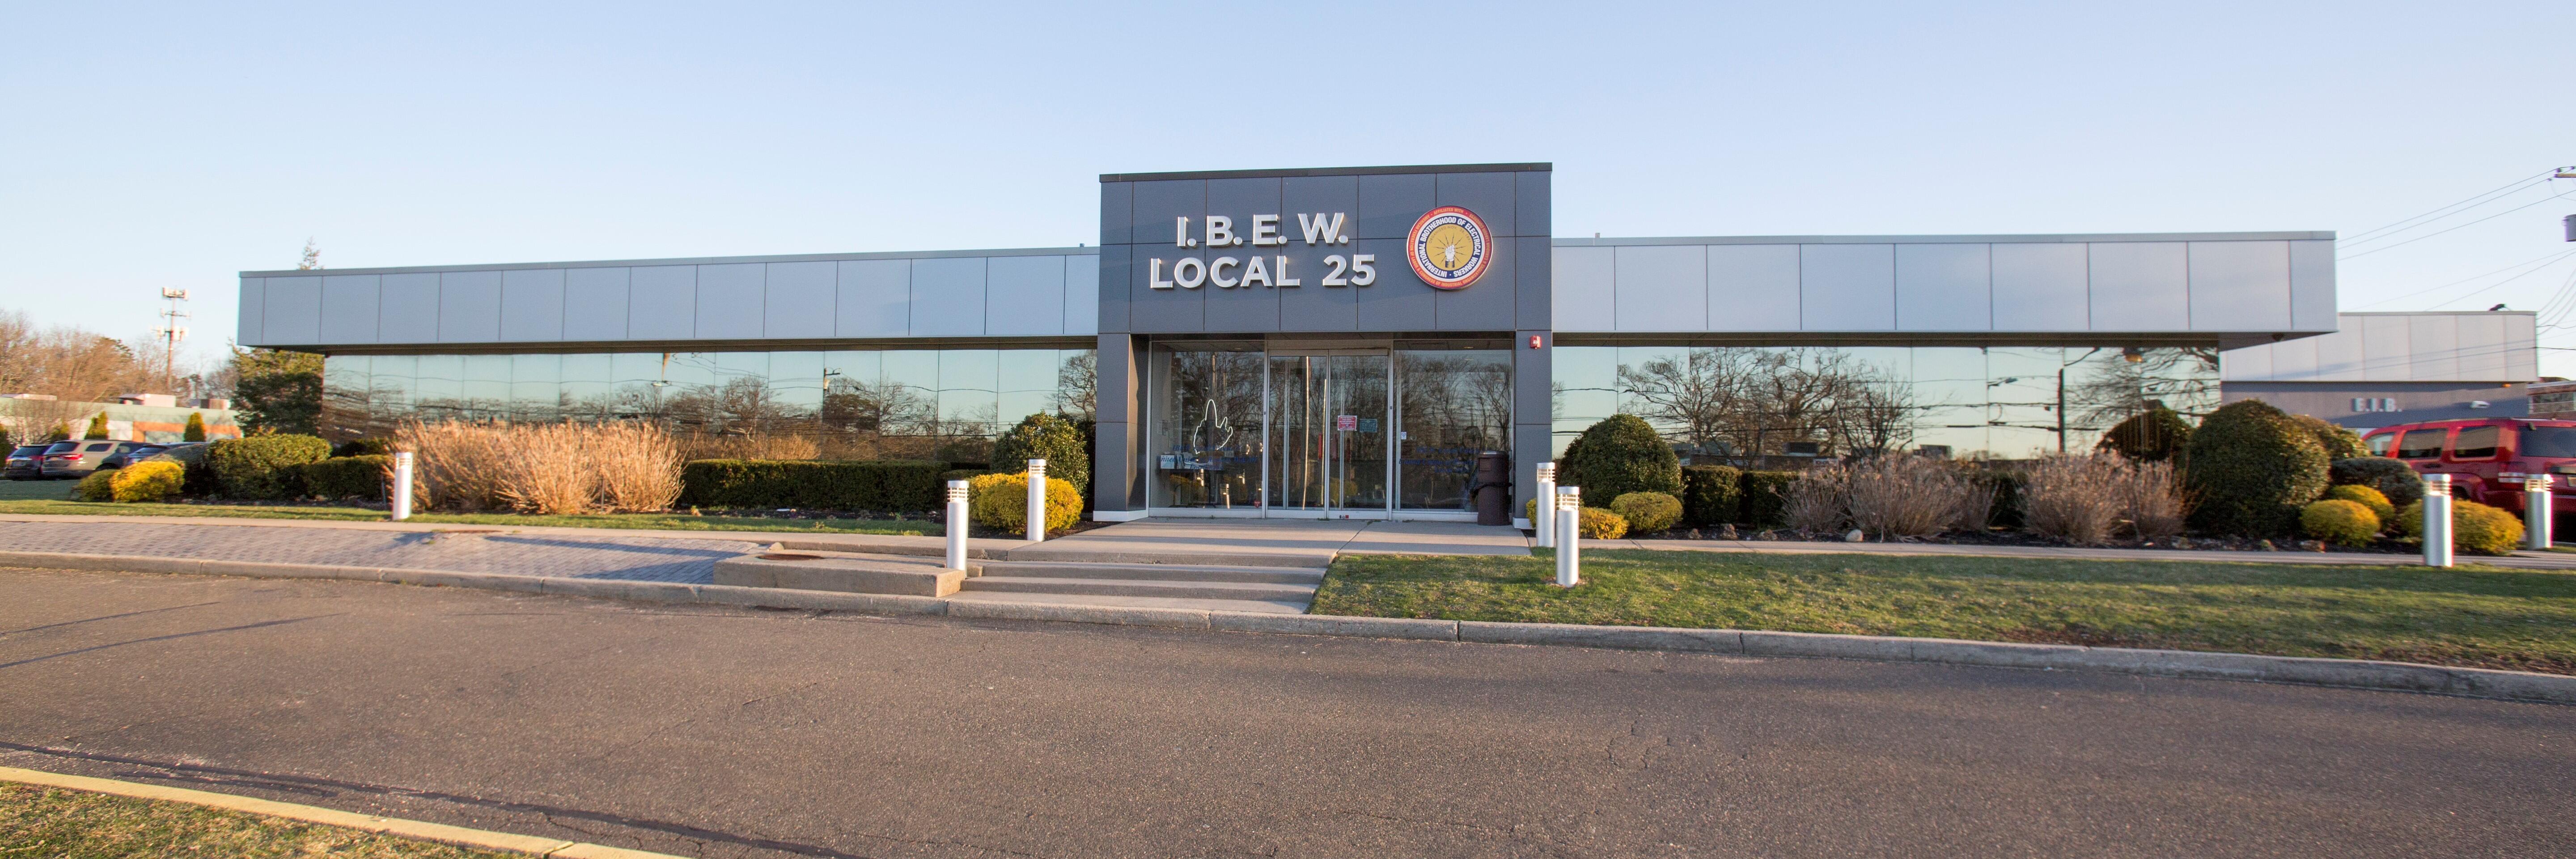 ibew-local-25-long-island-s-most-experienced-electricians